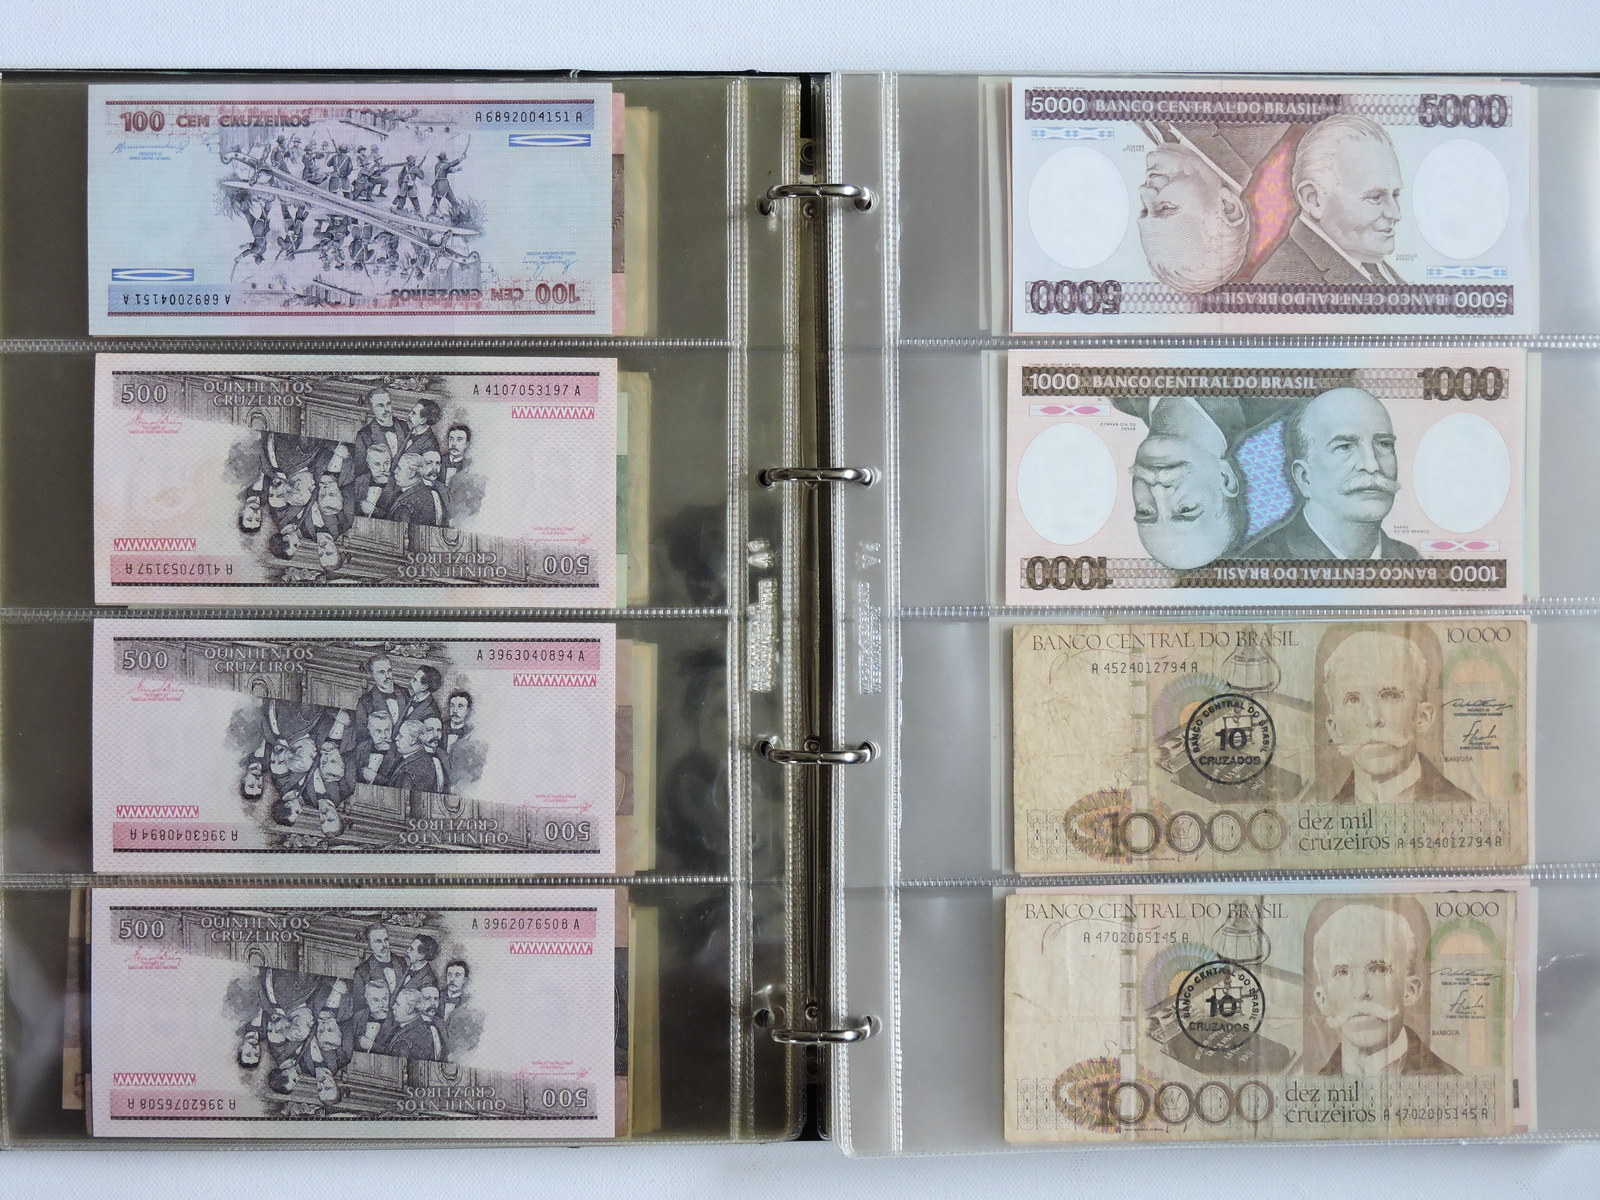 Banknotes, Brazil and Argentina
, page:13, item:1